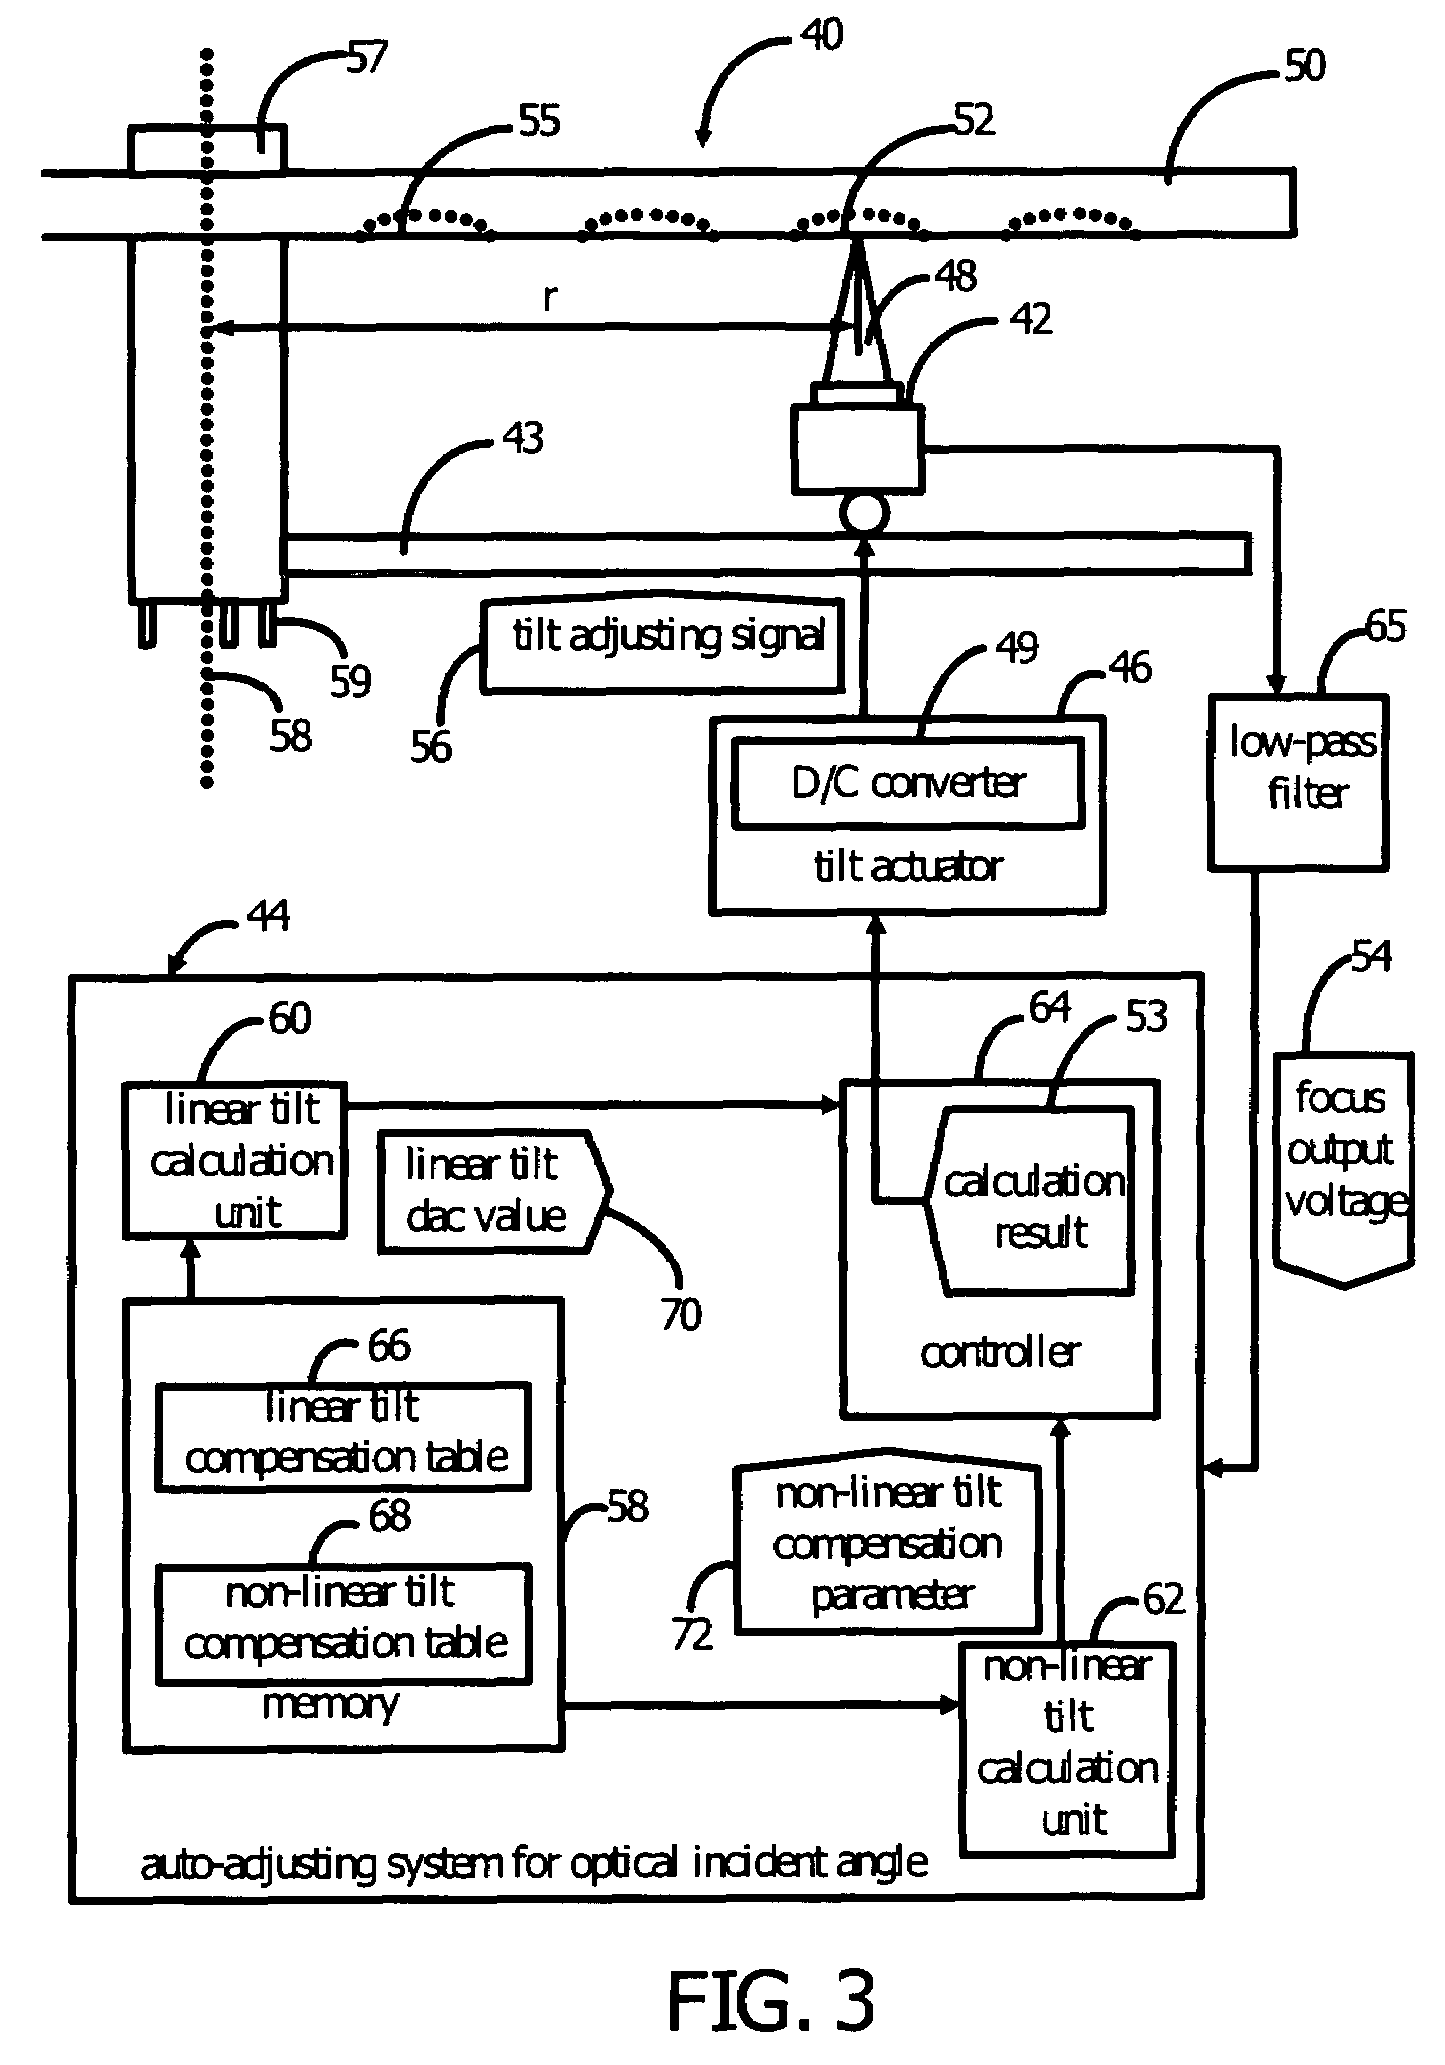 Auto-adjusting system for an optical incident angle